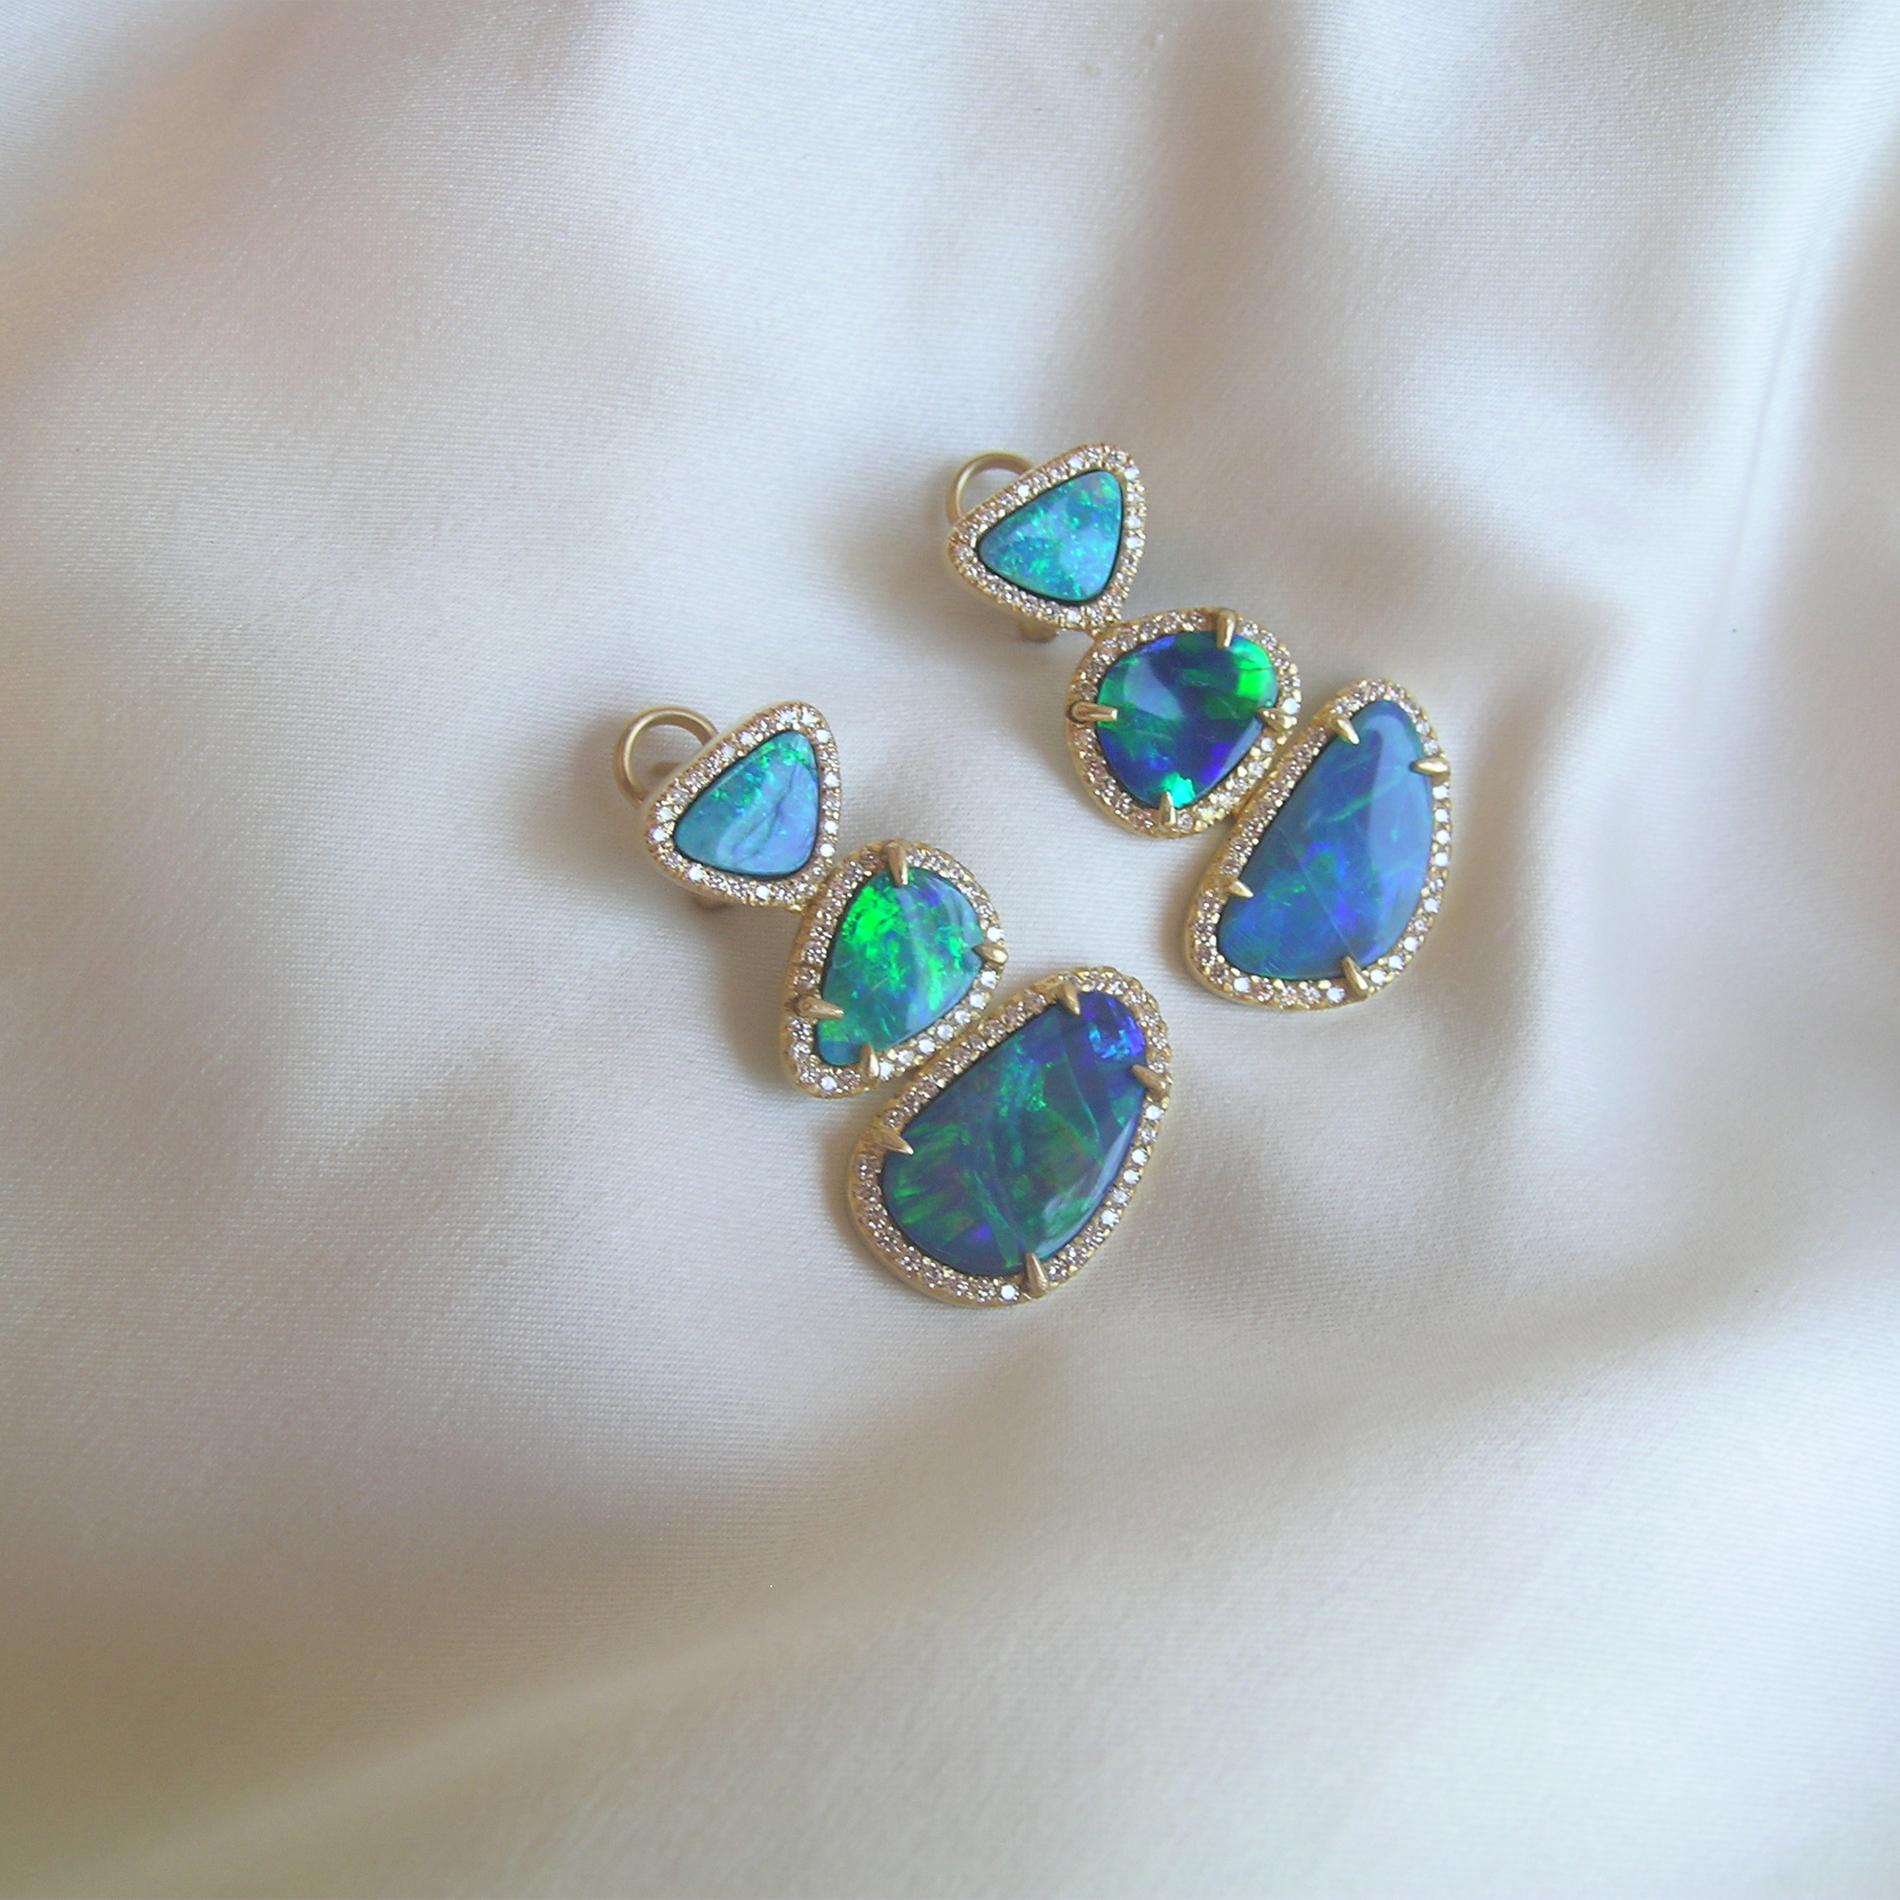 Colorful!  That is the one word to describe these Boulder Opal & Diamond Earrings.  The Opals are from Australia, the earrings are from Nancy Phillips.  There are many ways to describe these earrings from colorful to fun to luxurious.  Talk about a